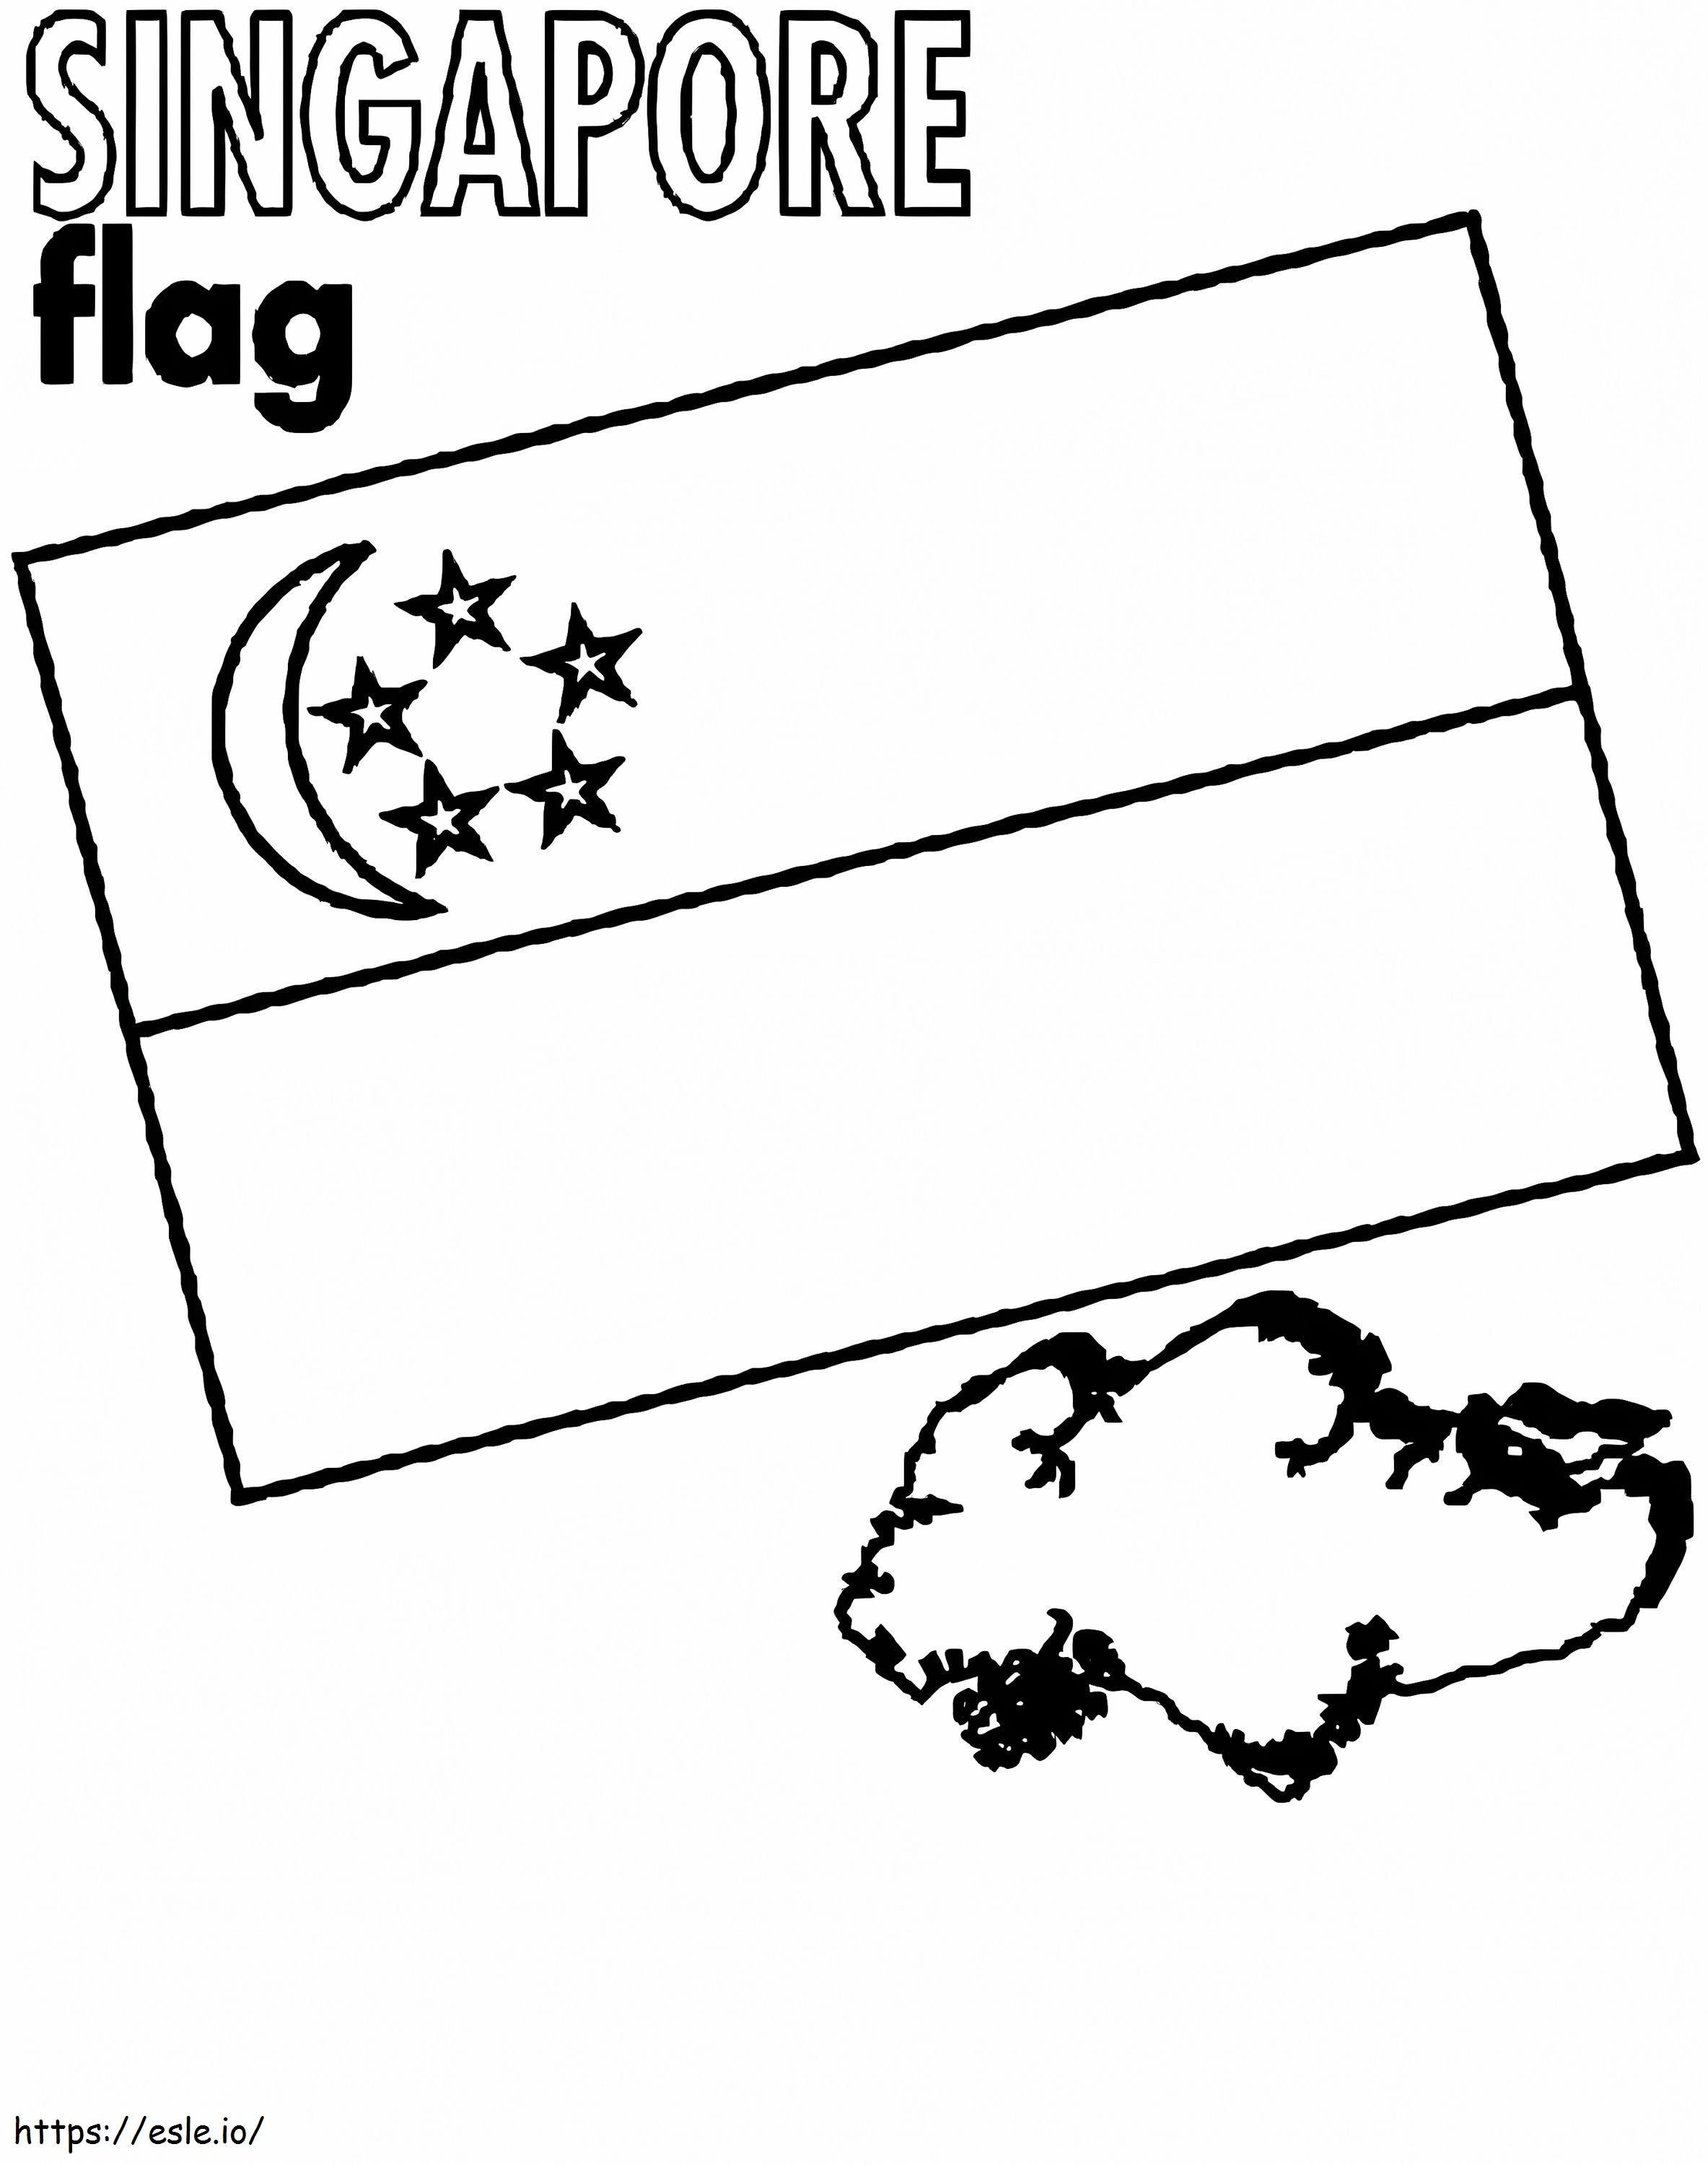 Singapore Flag And Map coloring page